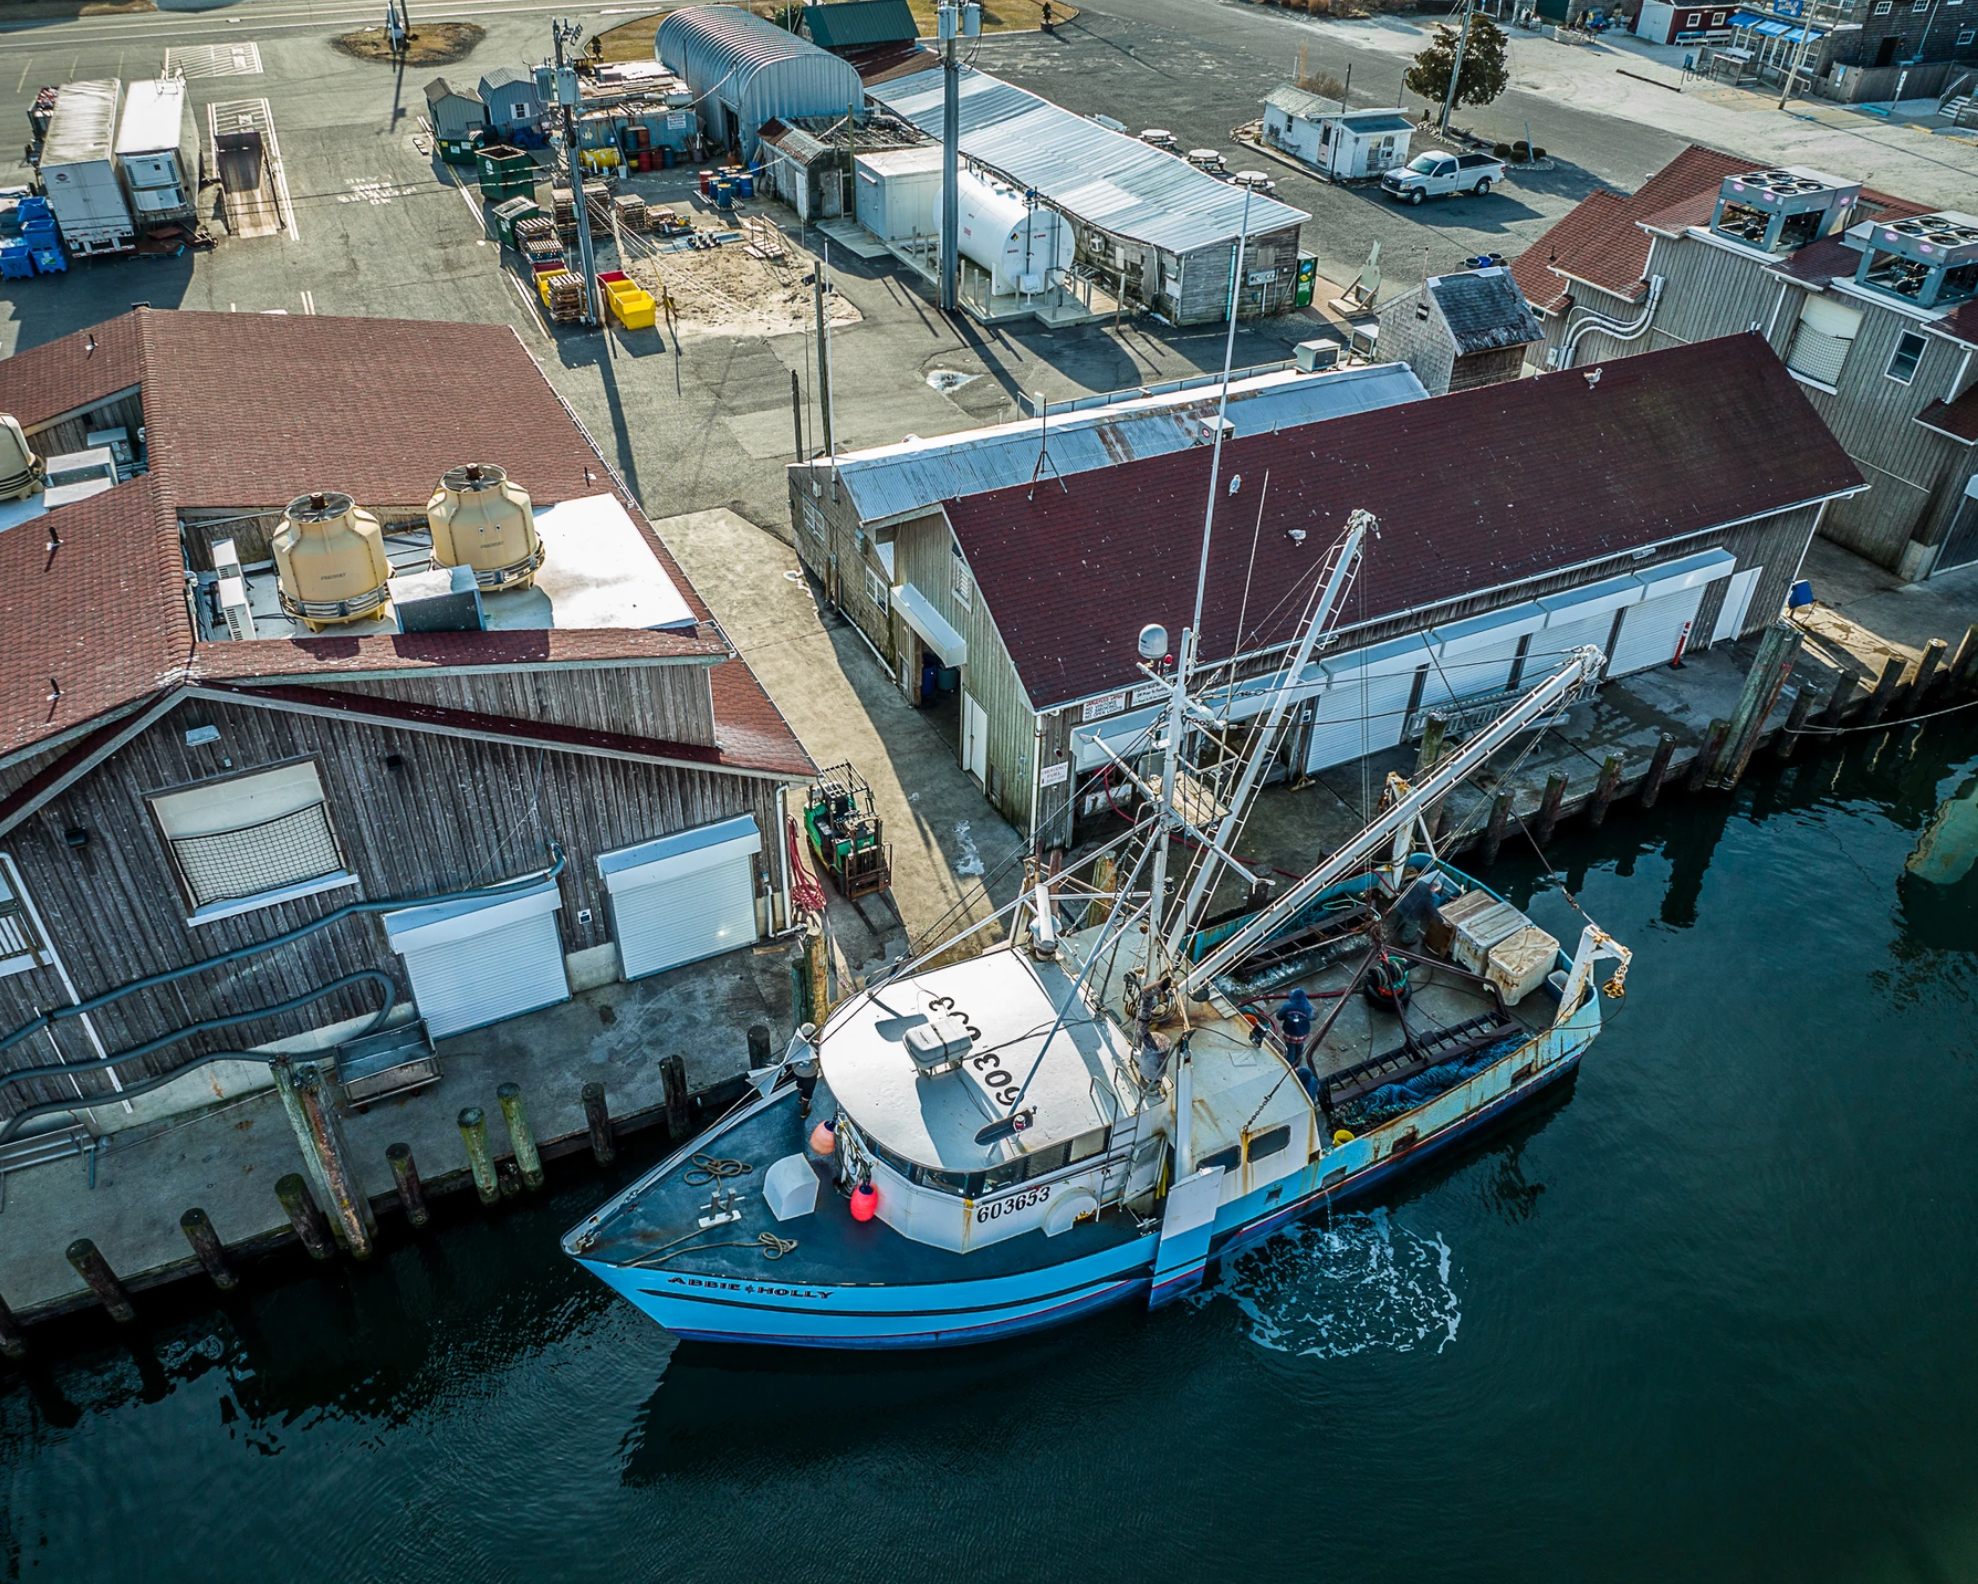 Overhead photo of the fishing vessel Abbie & Holly docked at Viking Village.